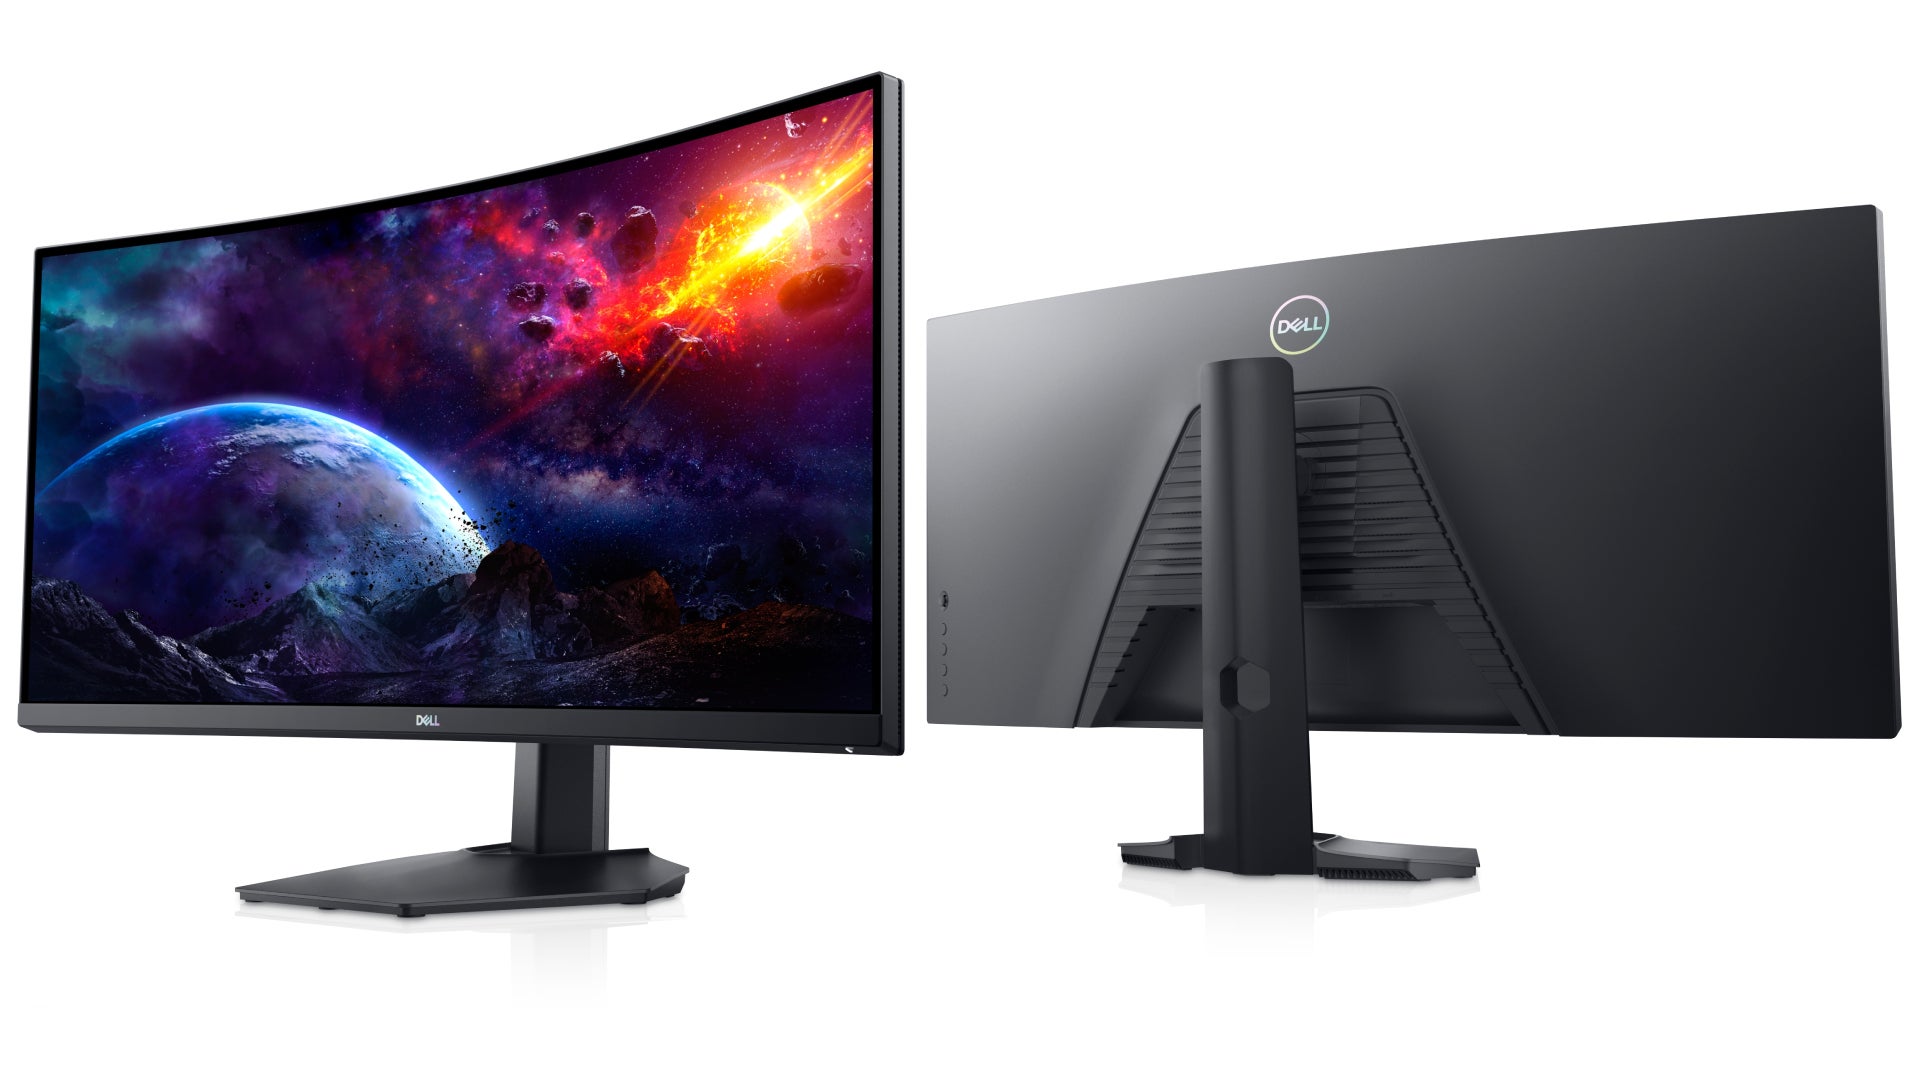 Get a Dell ultrawide gaming monitor for £359 | Eurogamer.net